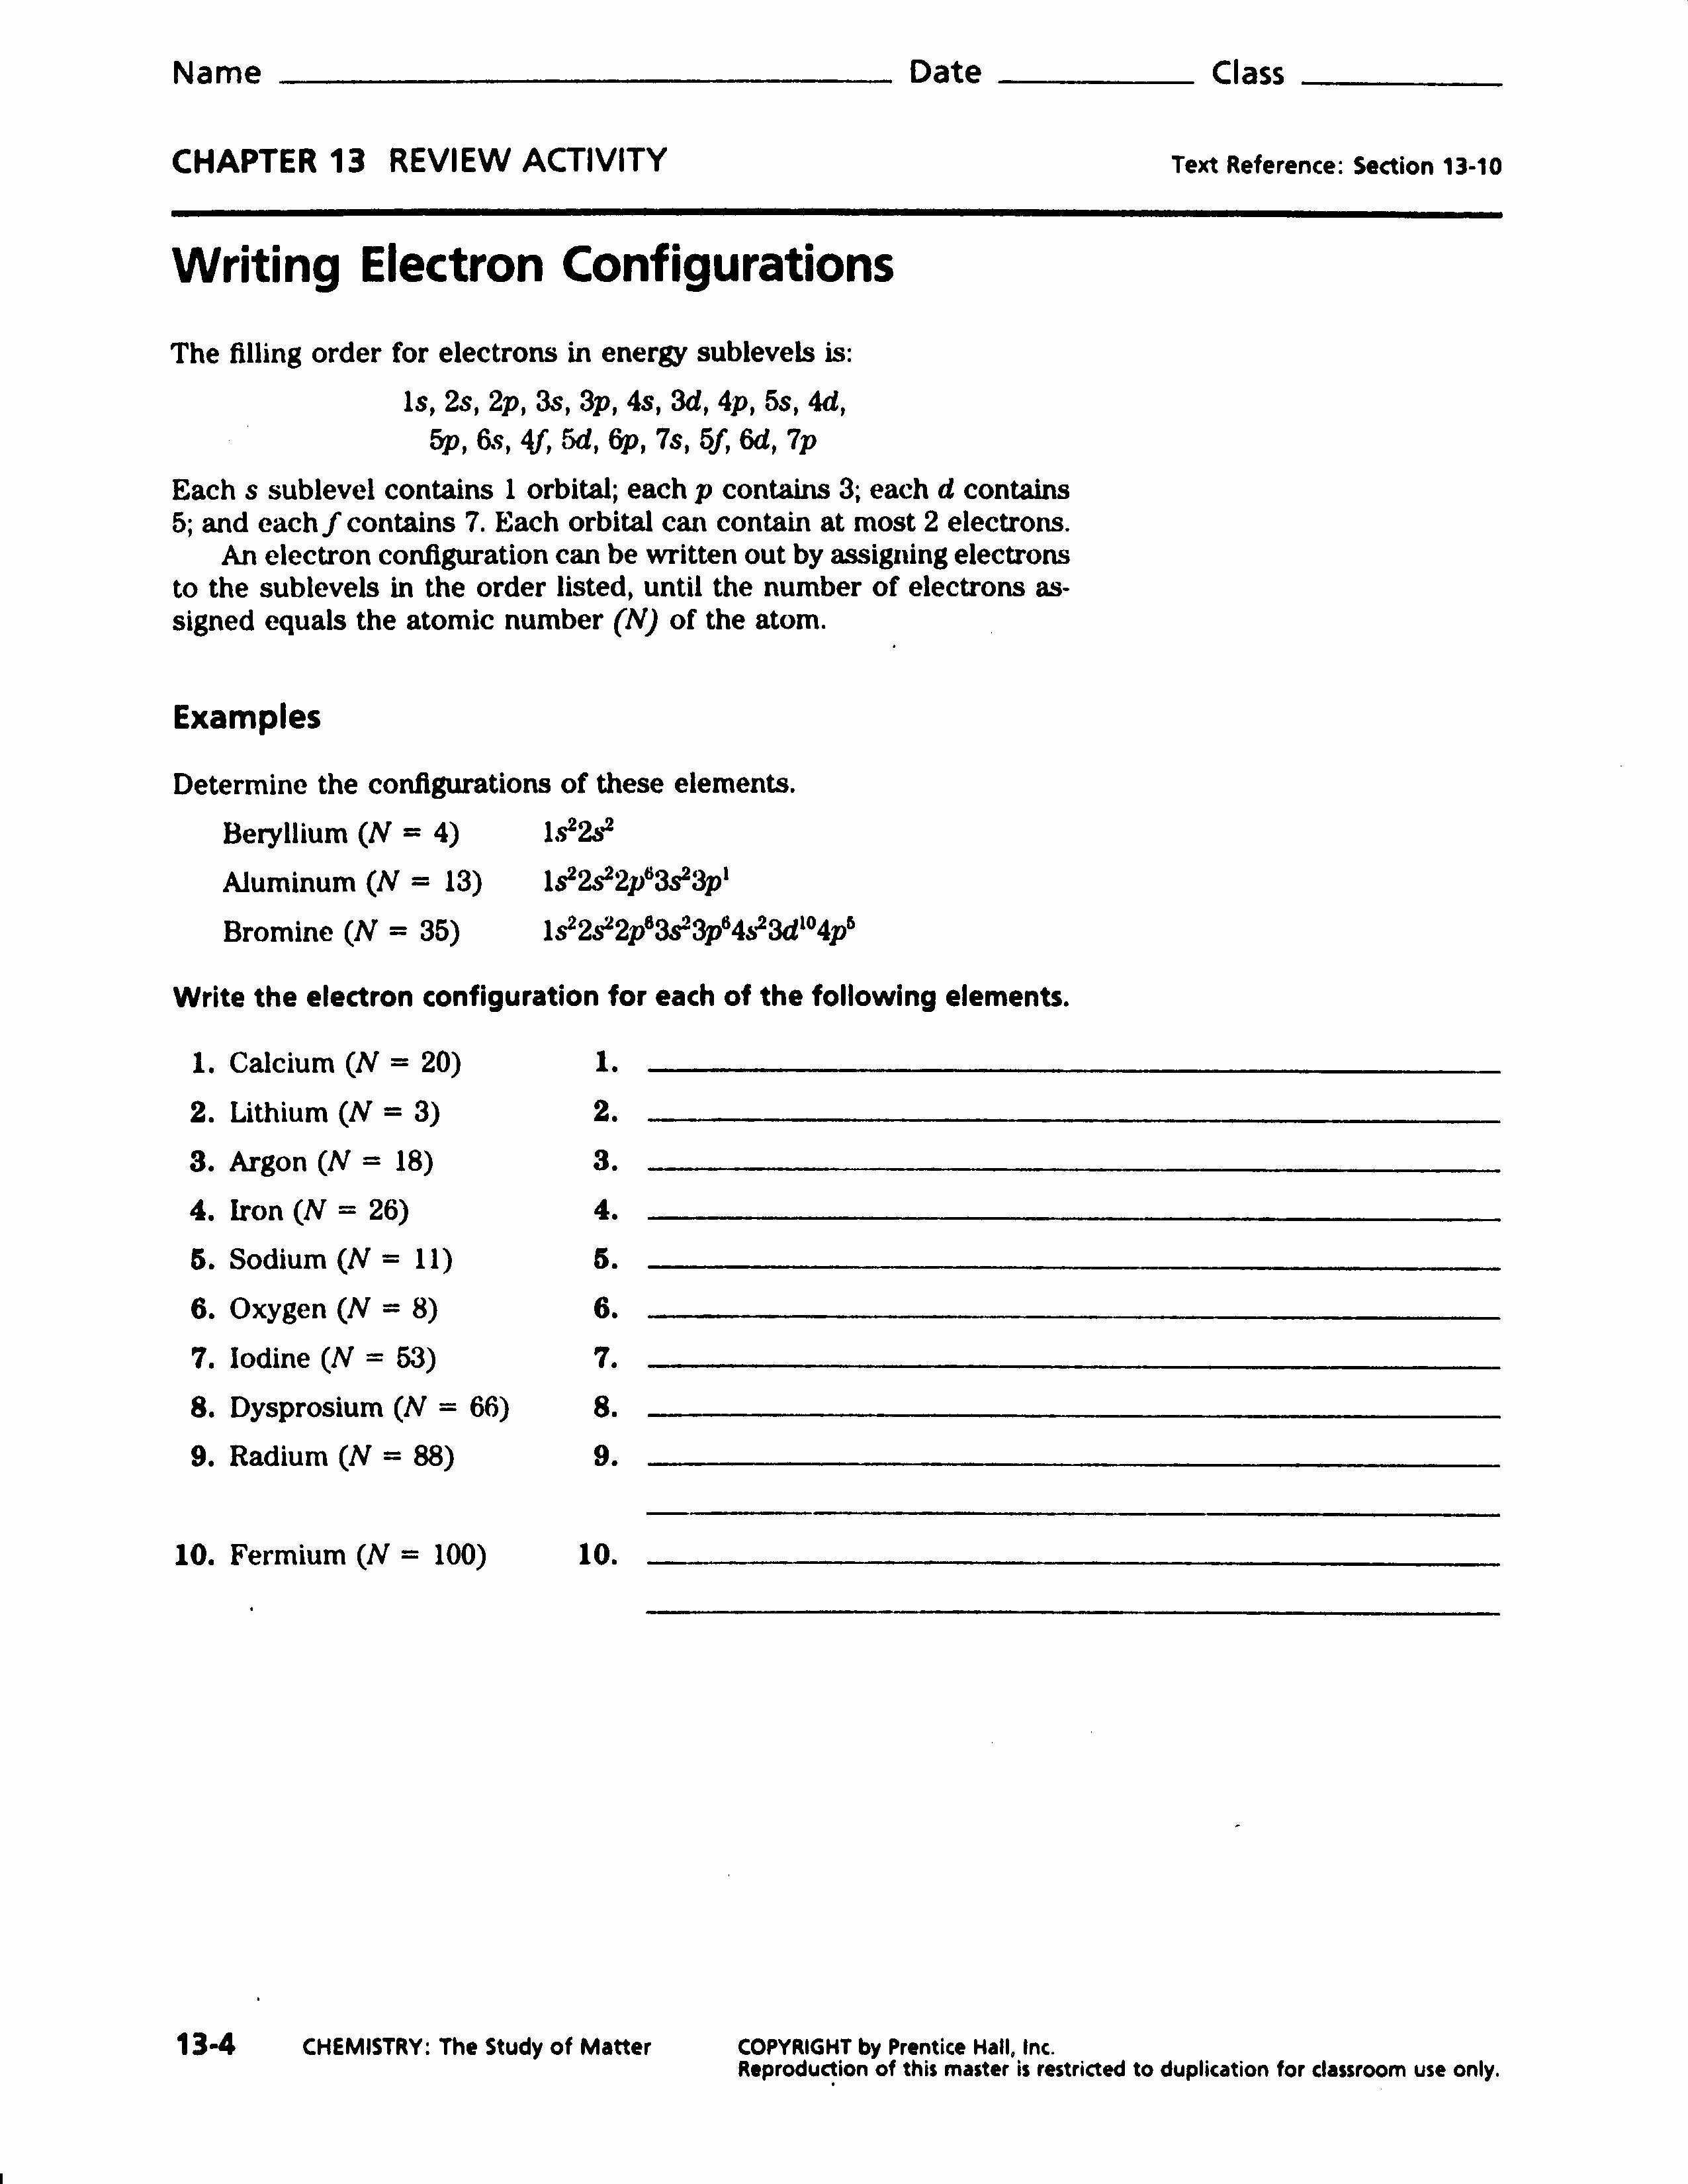 Electron Configuration Worksheet Answers Inspirational Electron Configuration Worksheet Answers Part A